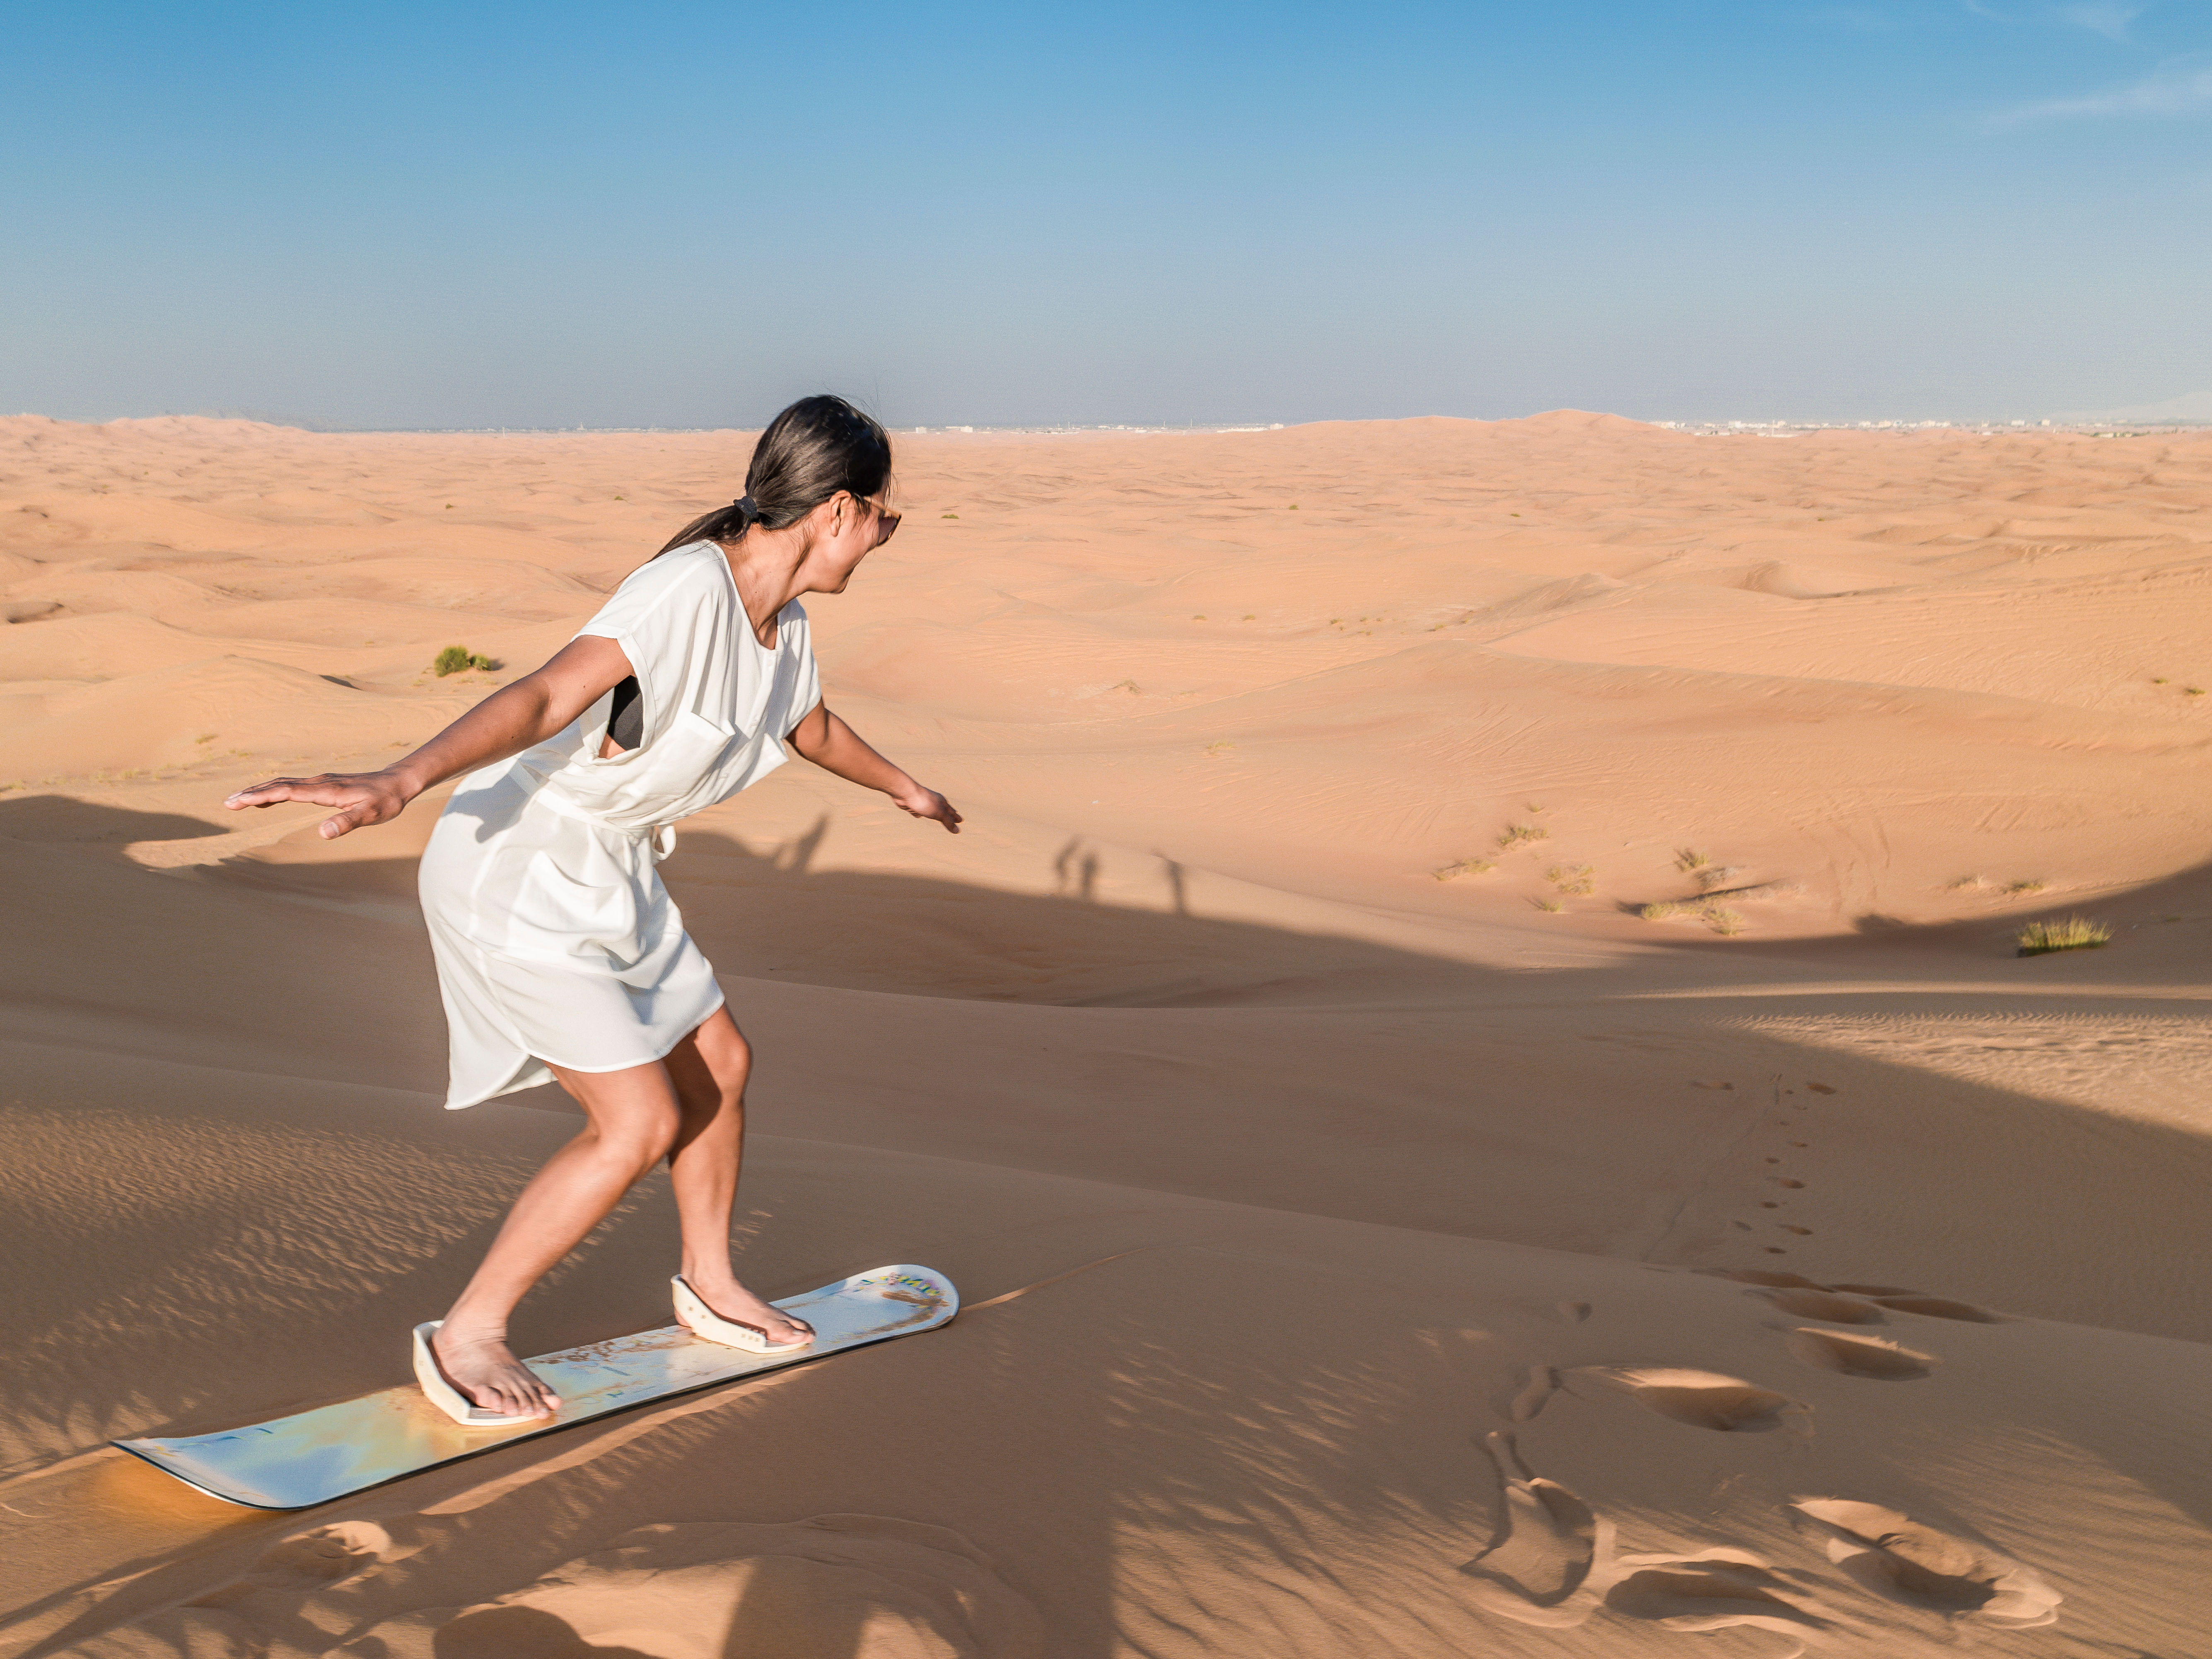 Feel a rush as you fly down the dunes